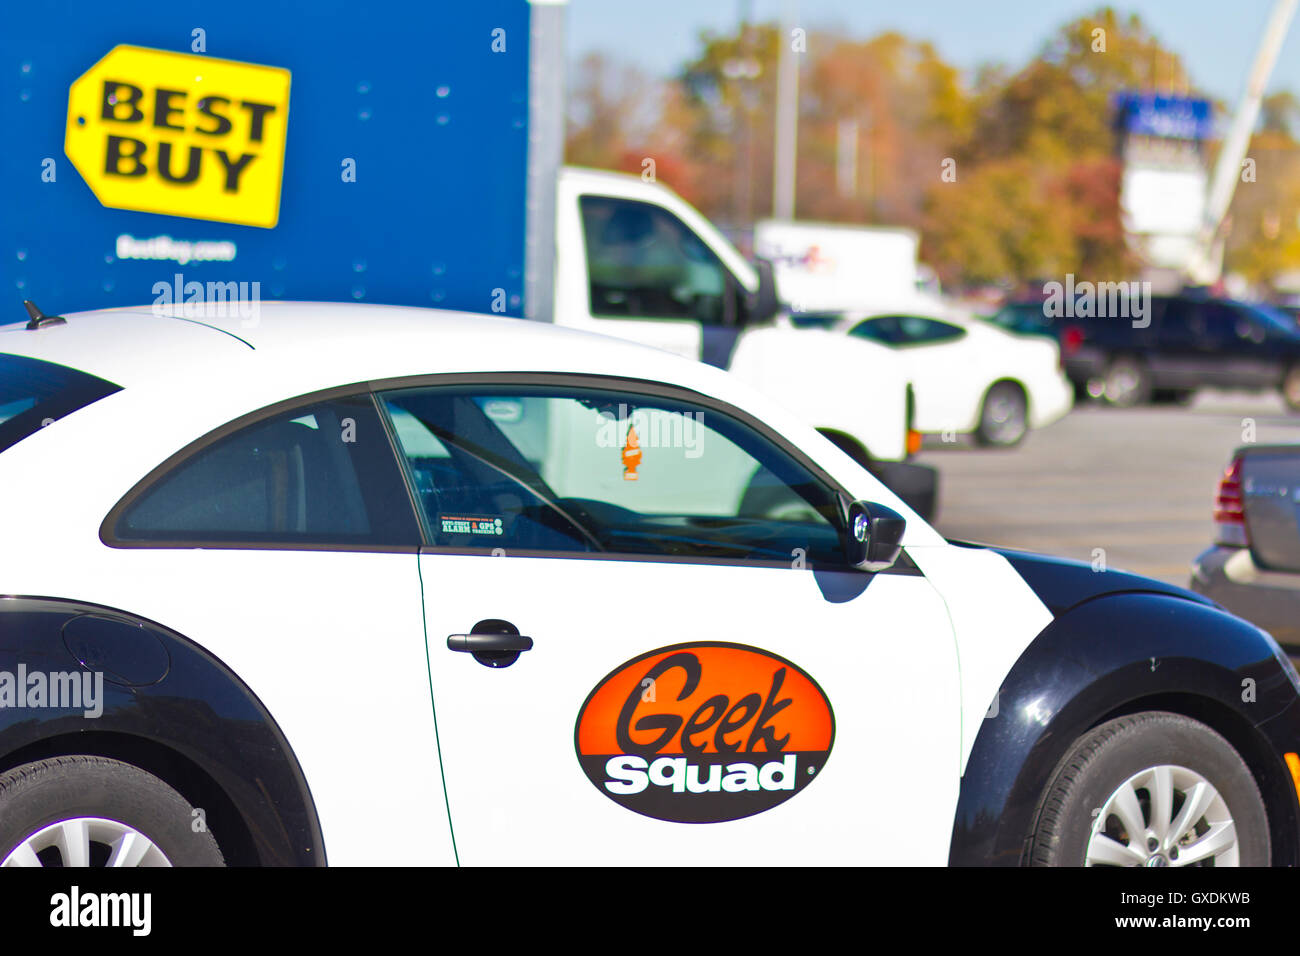 Indianapolis - Circa November 2015: Best Buy Geek Squad car - The Geek Squad Provides On-Site Customer Support I Stock Photo